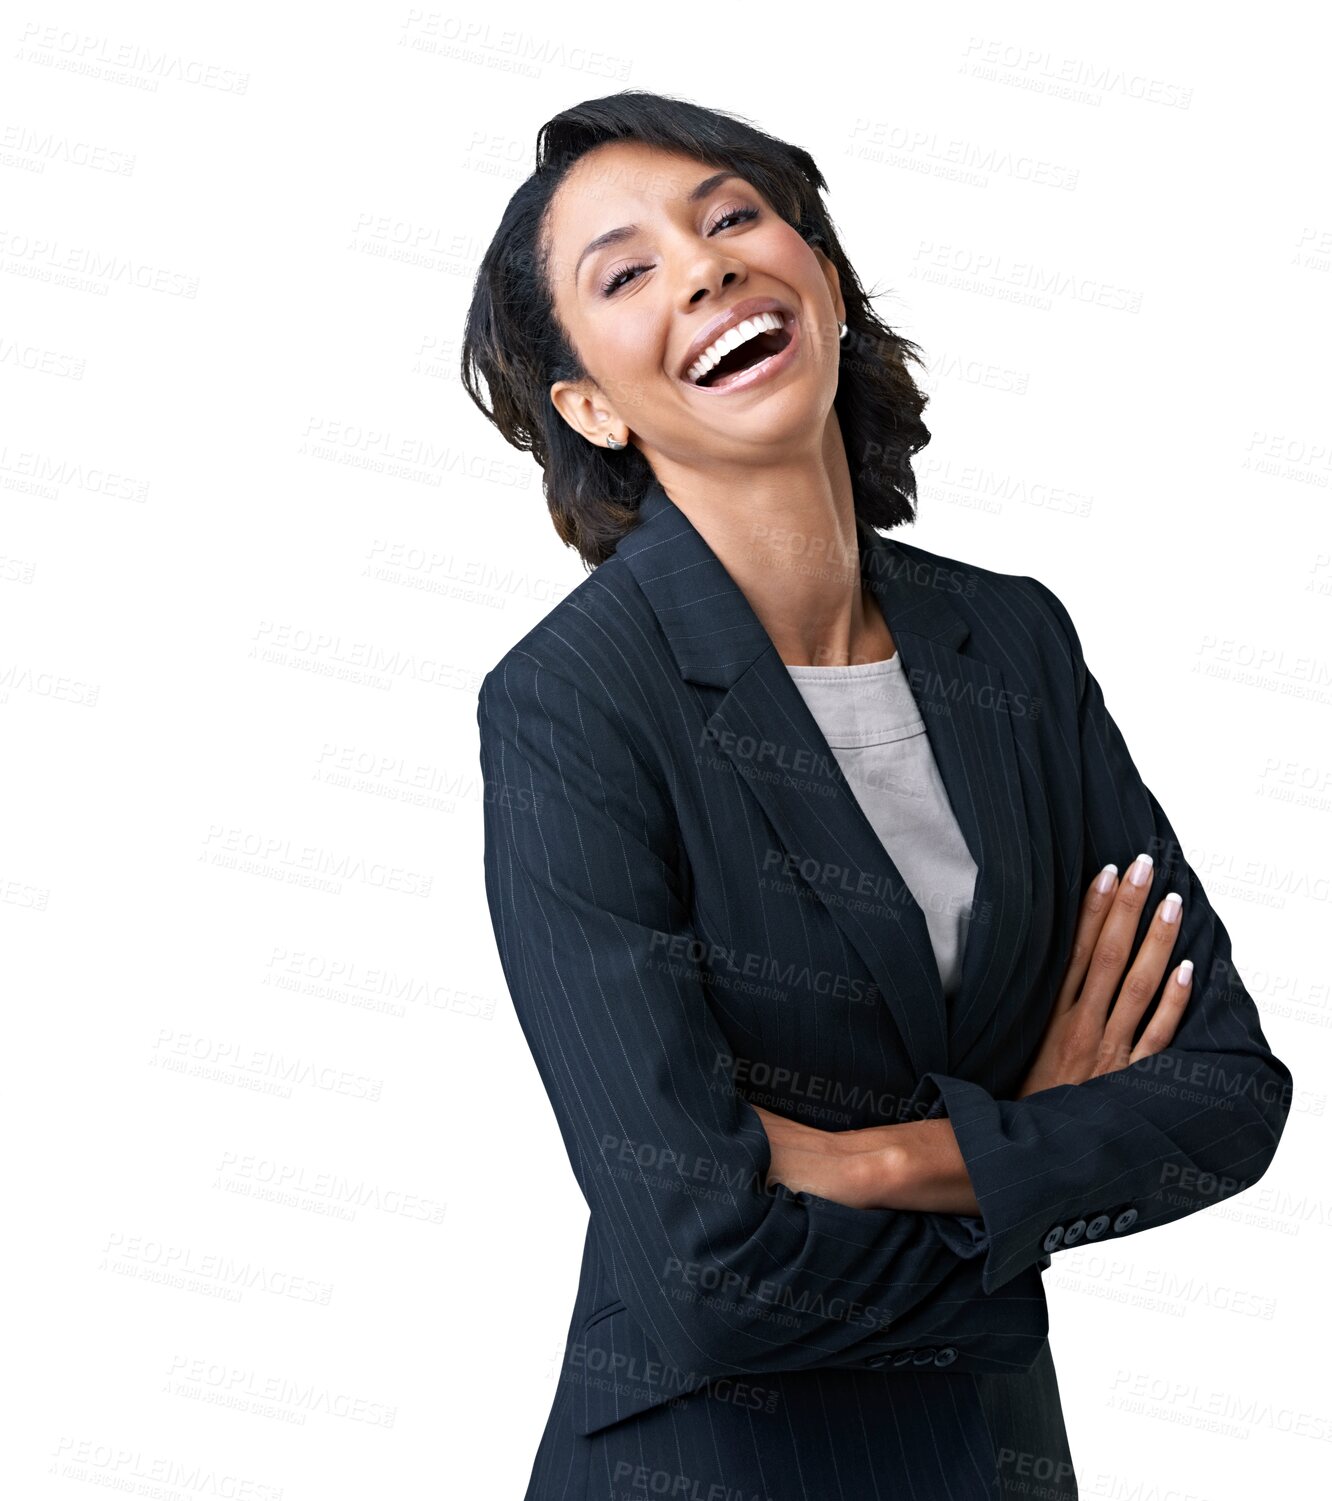 Buy stock photo Portrait, lawyer and funny woman with arms crossed isolated on a transparent png background. Confidence, professional and female entrepreneur, attorney and person from Brazil laughing for business.